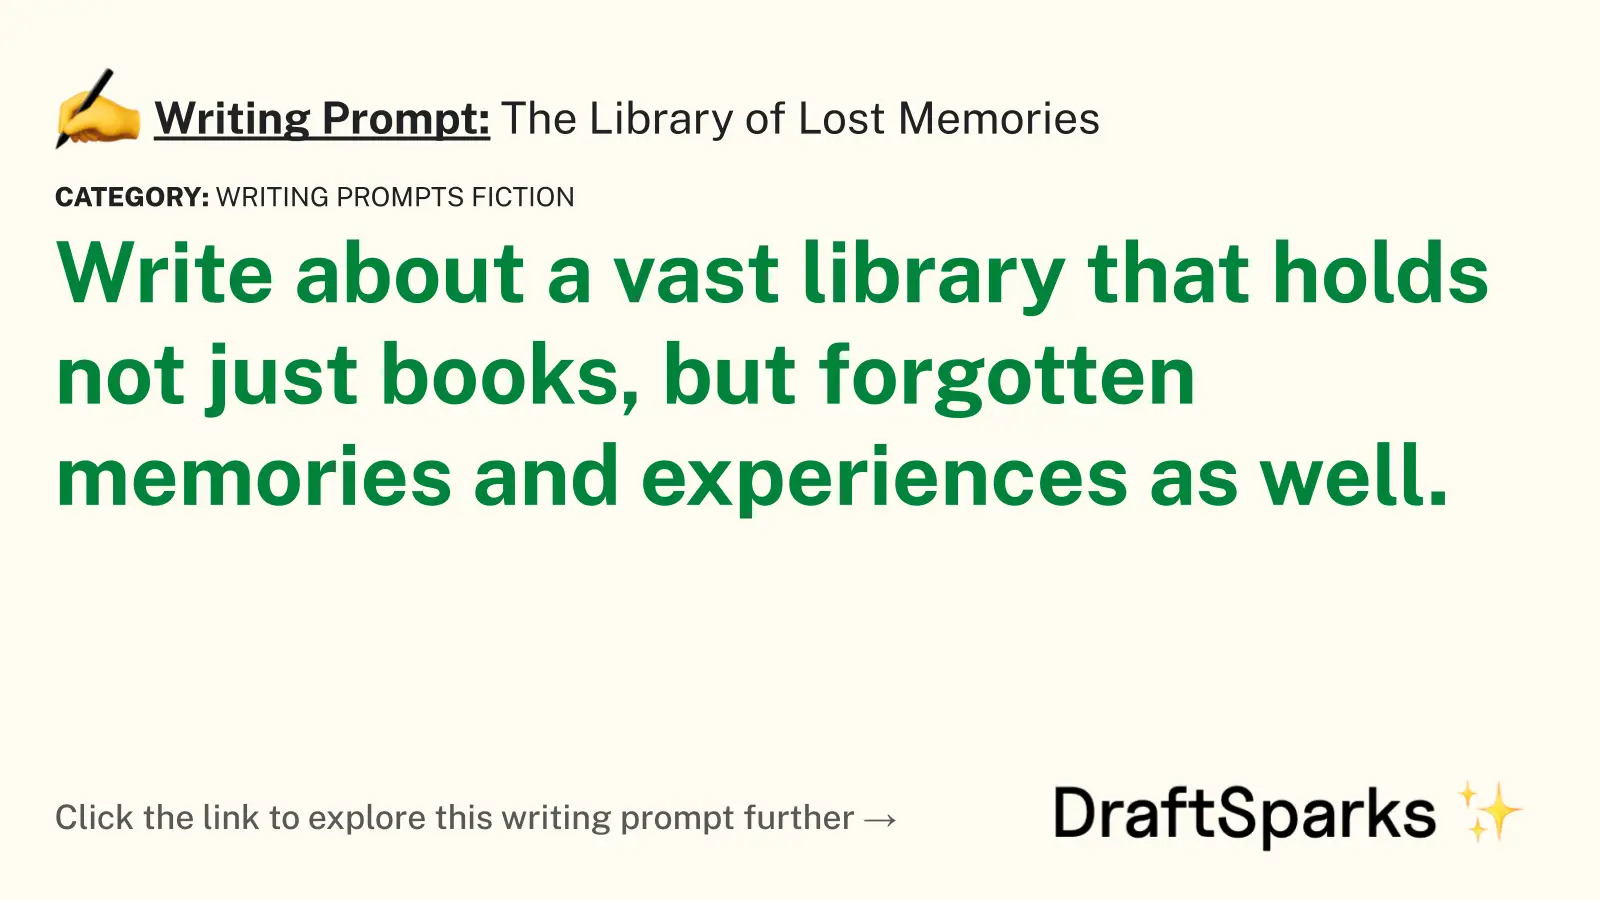 The Library of Lost Memories